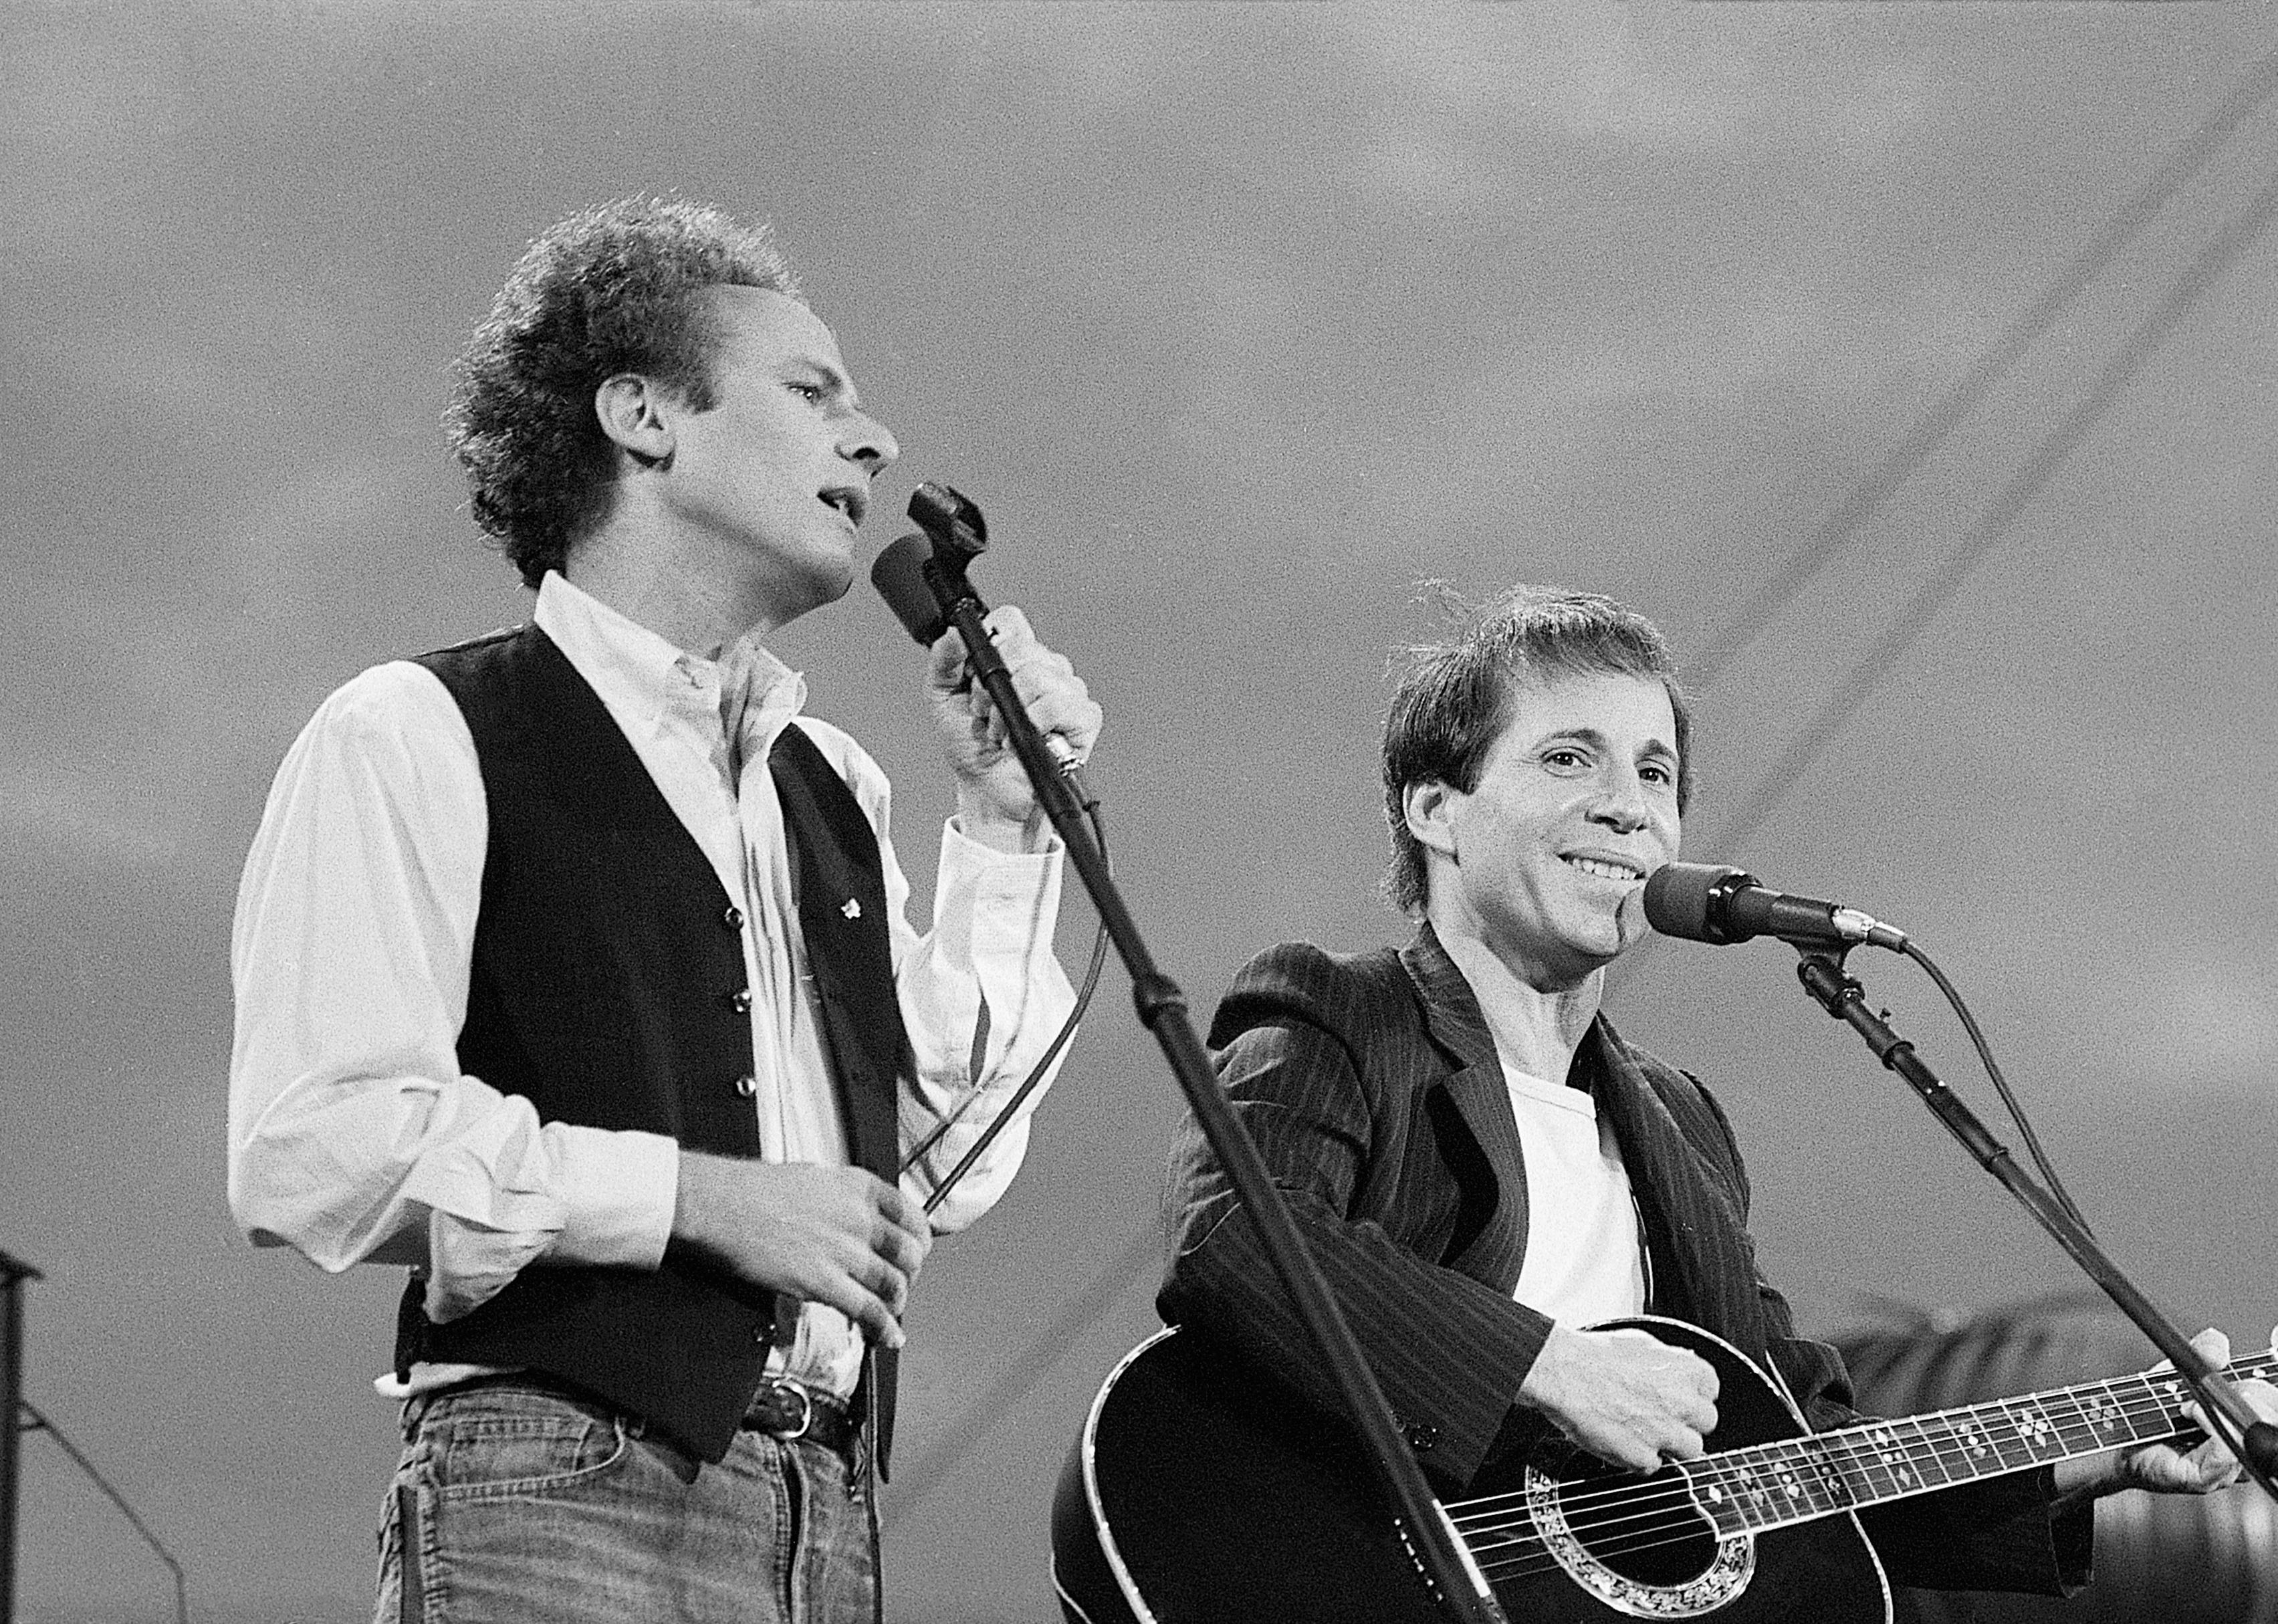 <p>The folk duo of Simon & Garfunkel reunited several times after their initial split, most notably for this historic benefit concert. It opened with the classic song "Mrs. Robinson" and later hit an unexpected snag when a <a href="https://www.themusicman.uk/simon-garfunkel-mrs-robinson/">crazed audience member rushed the stage</a>. An album recording of the event came out the following year and ultimately went certified double platinum.</p>